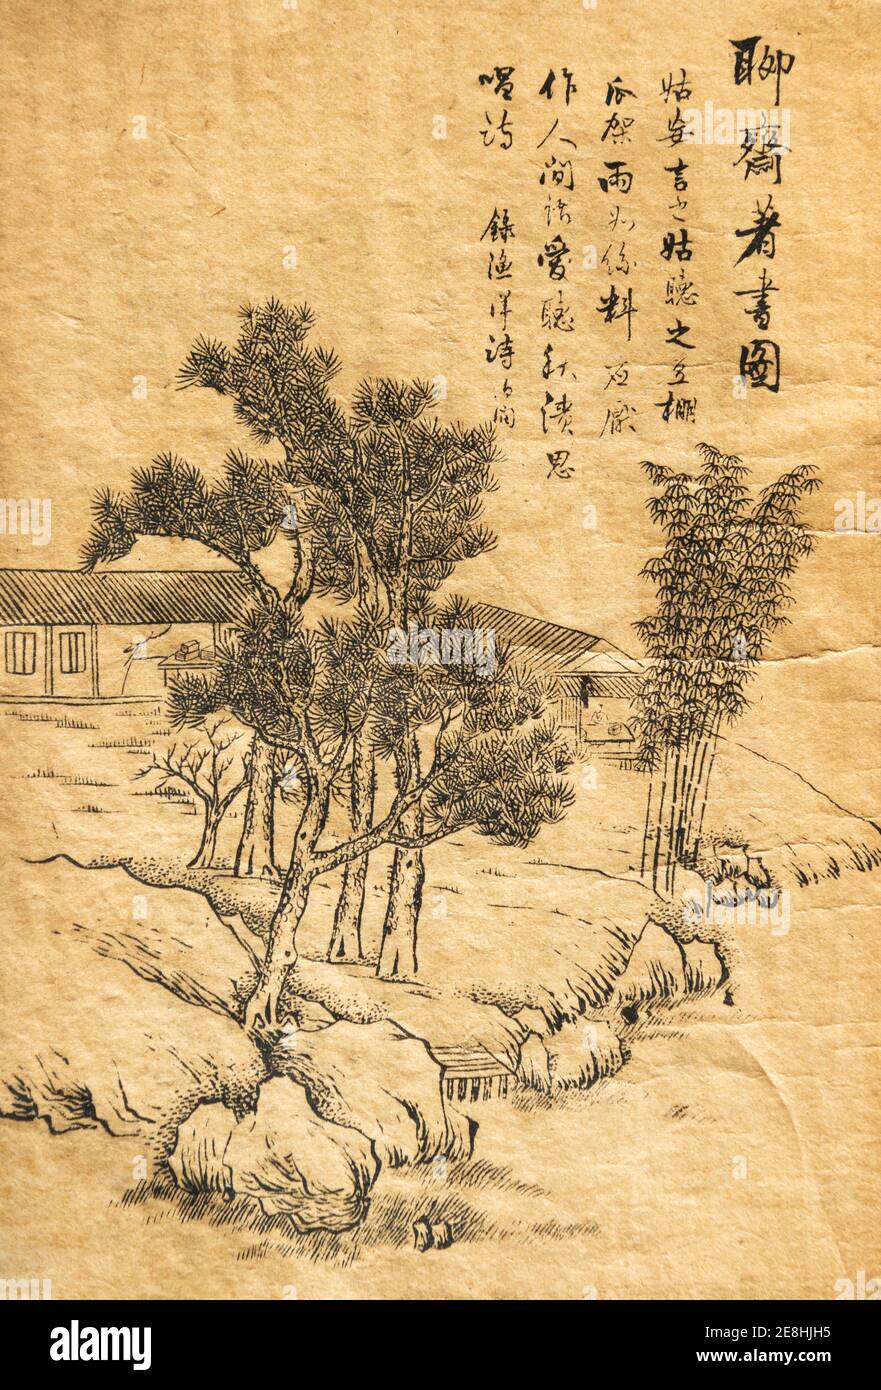 An illustration of a late Qing Dynasty copy showing Pu Songling writing Strange Tales from a Chinese Studio (Liaozhai Zhiyi). Stock Photo